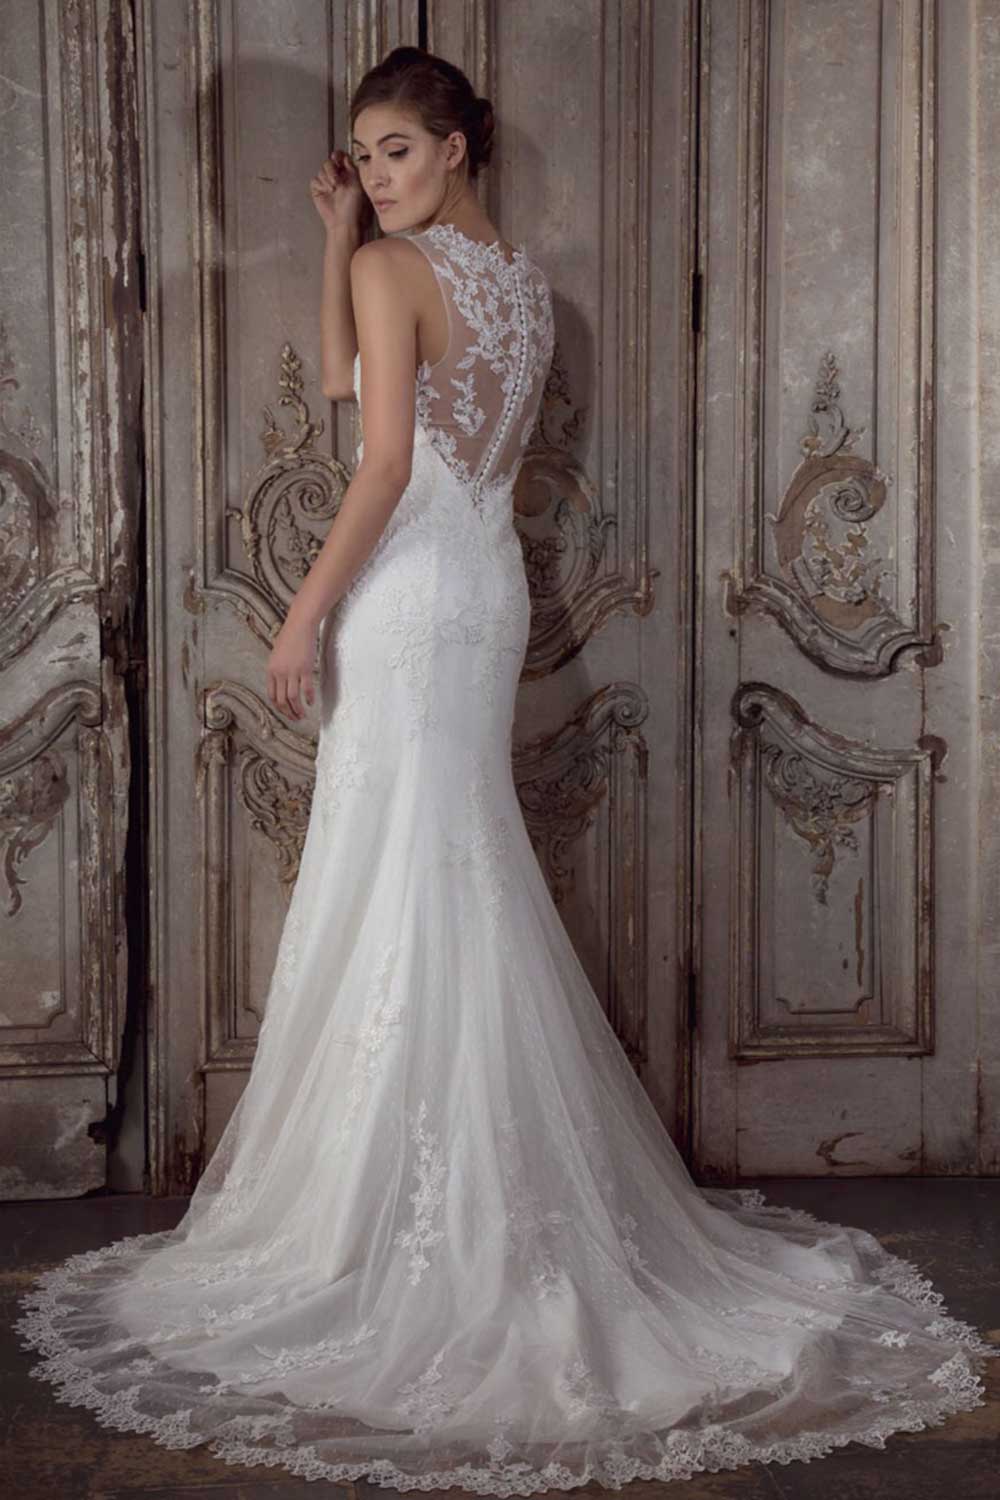 Lace Dress with See-through Back - back